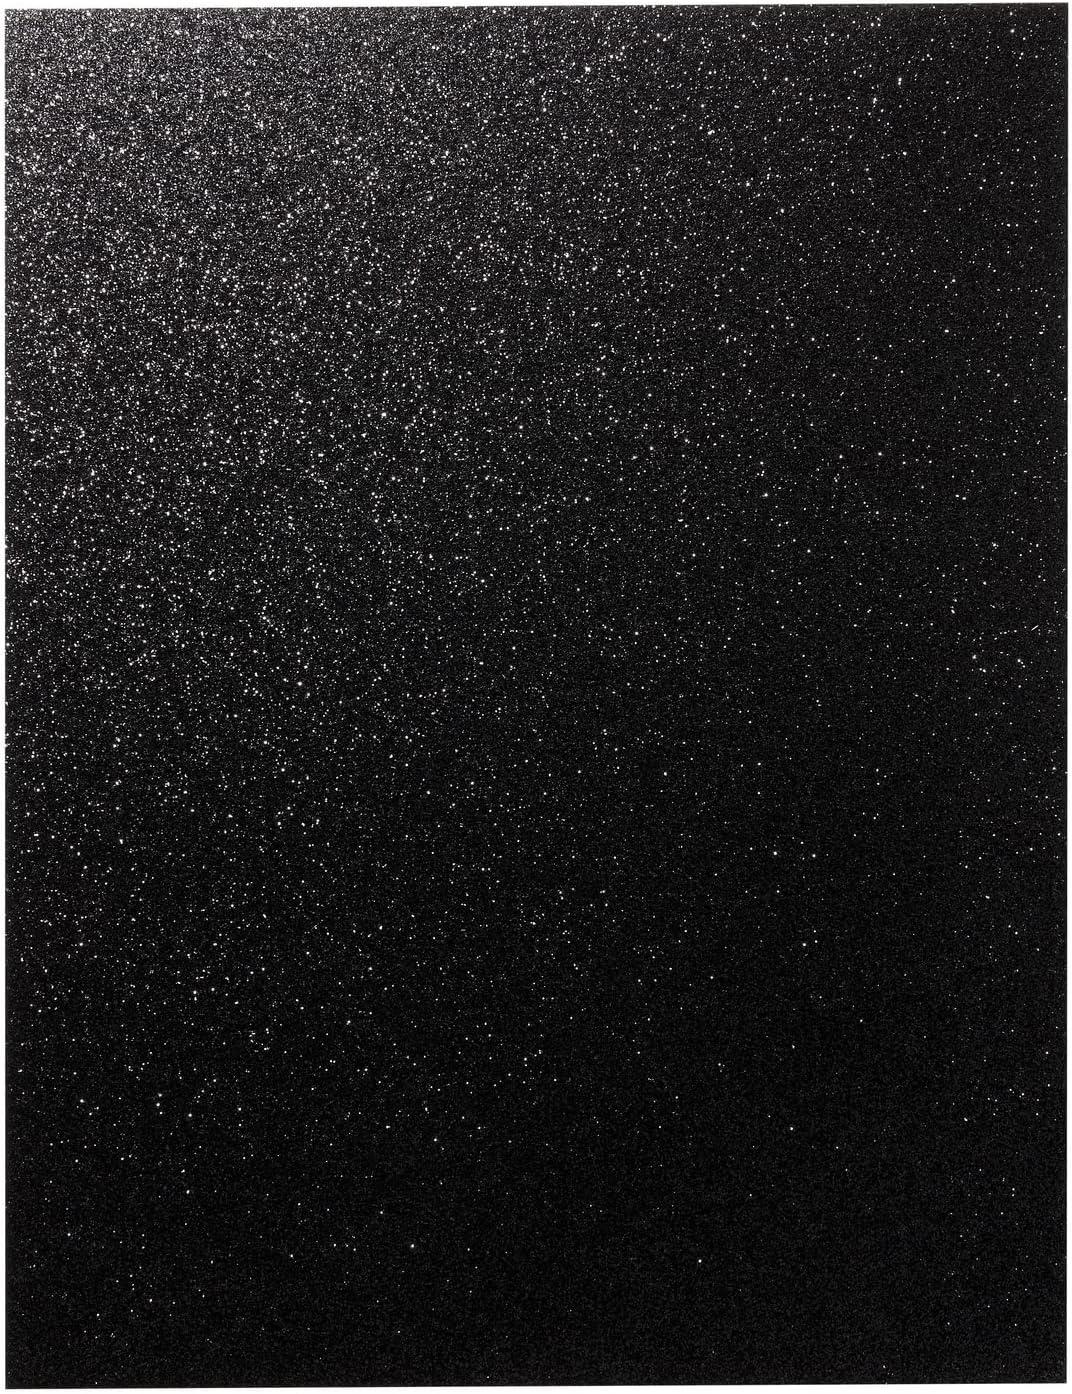 24 Sheets Black Glitter Cardstock Paper for Crafts Birthday Card